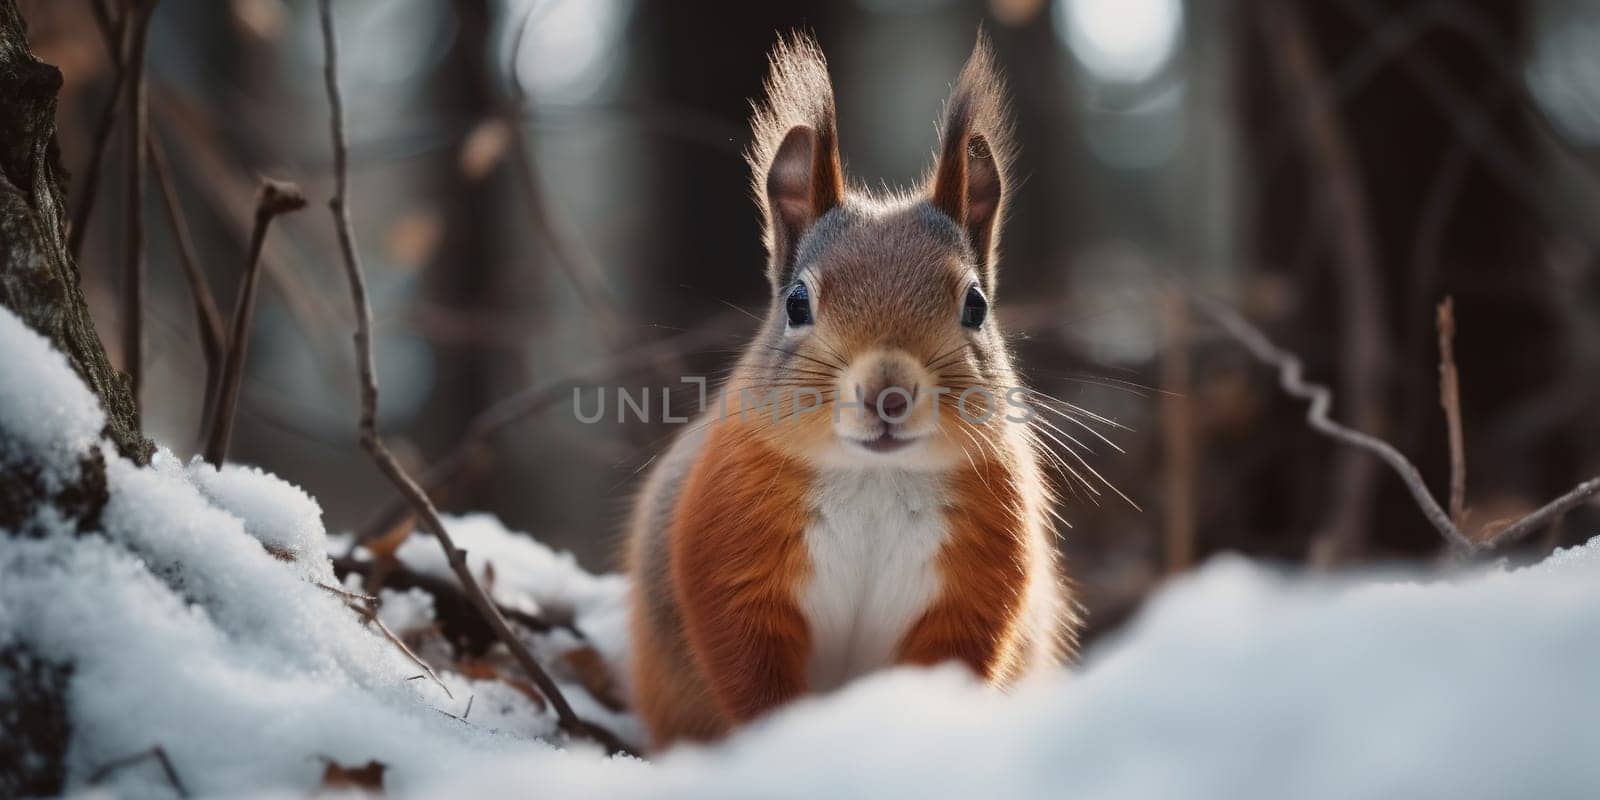 Cute Red Wild Squirrel In Winter Forest by tan4ikk1